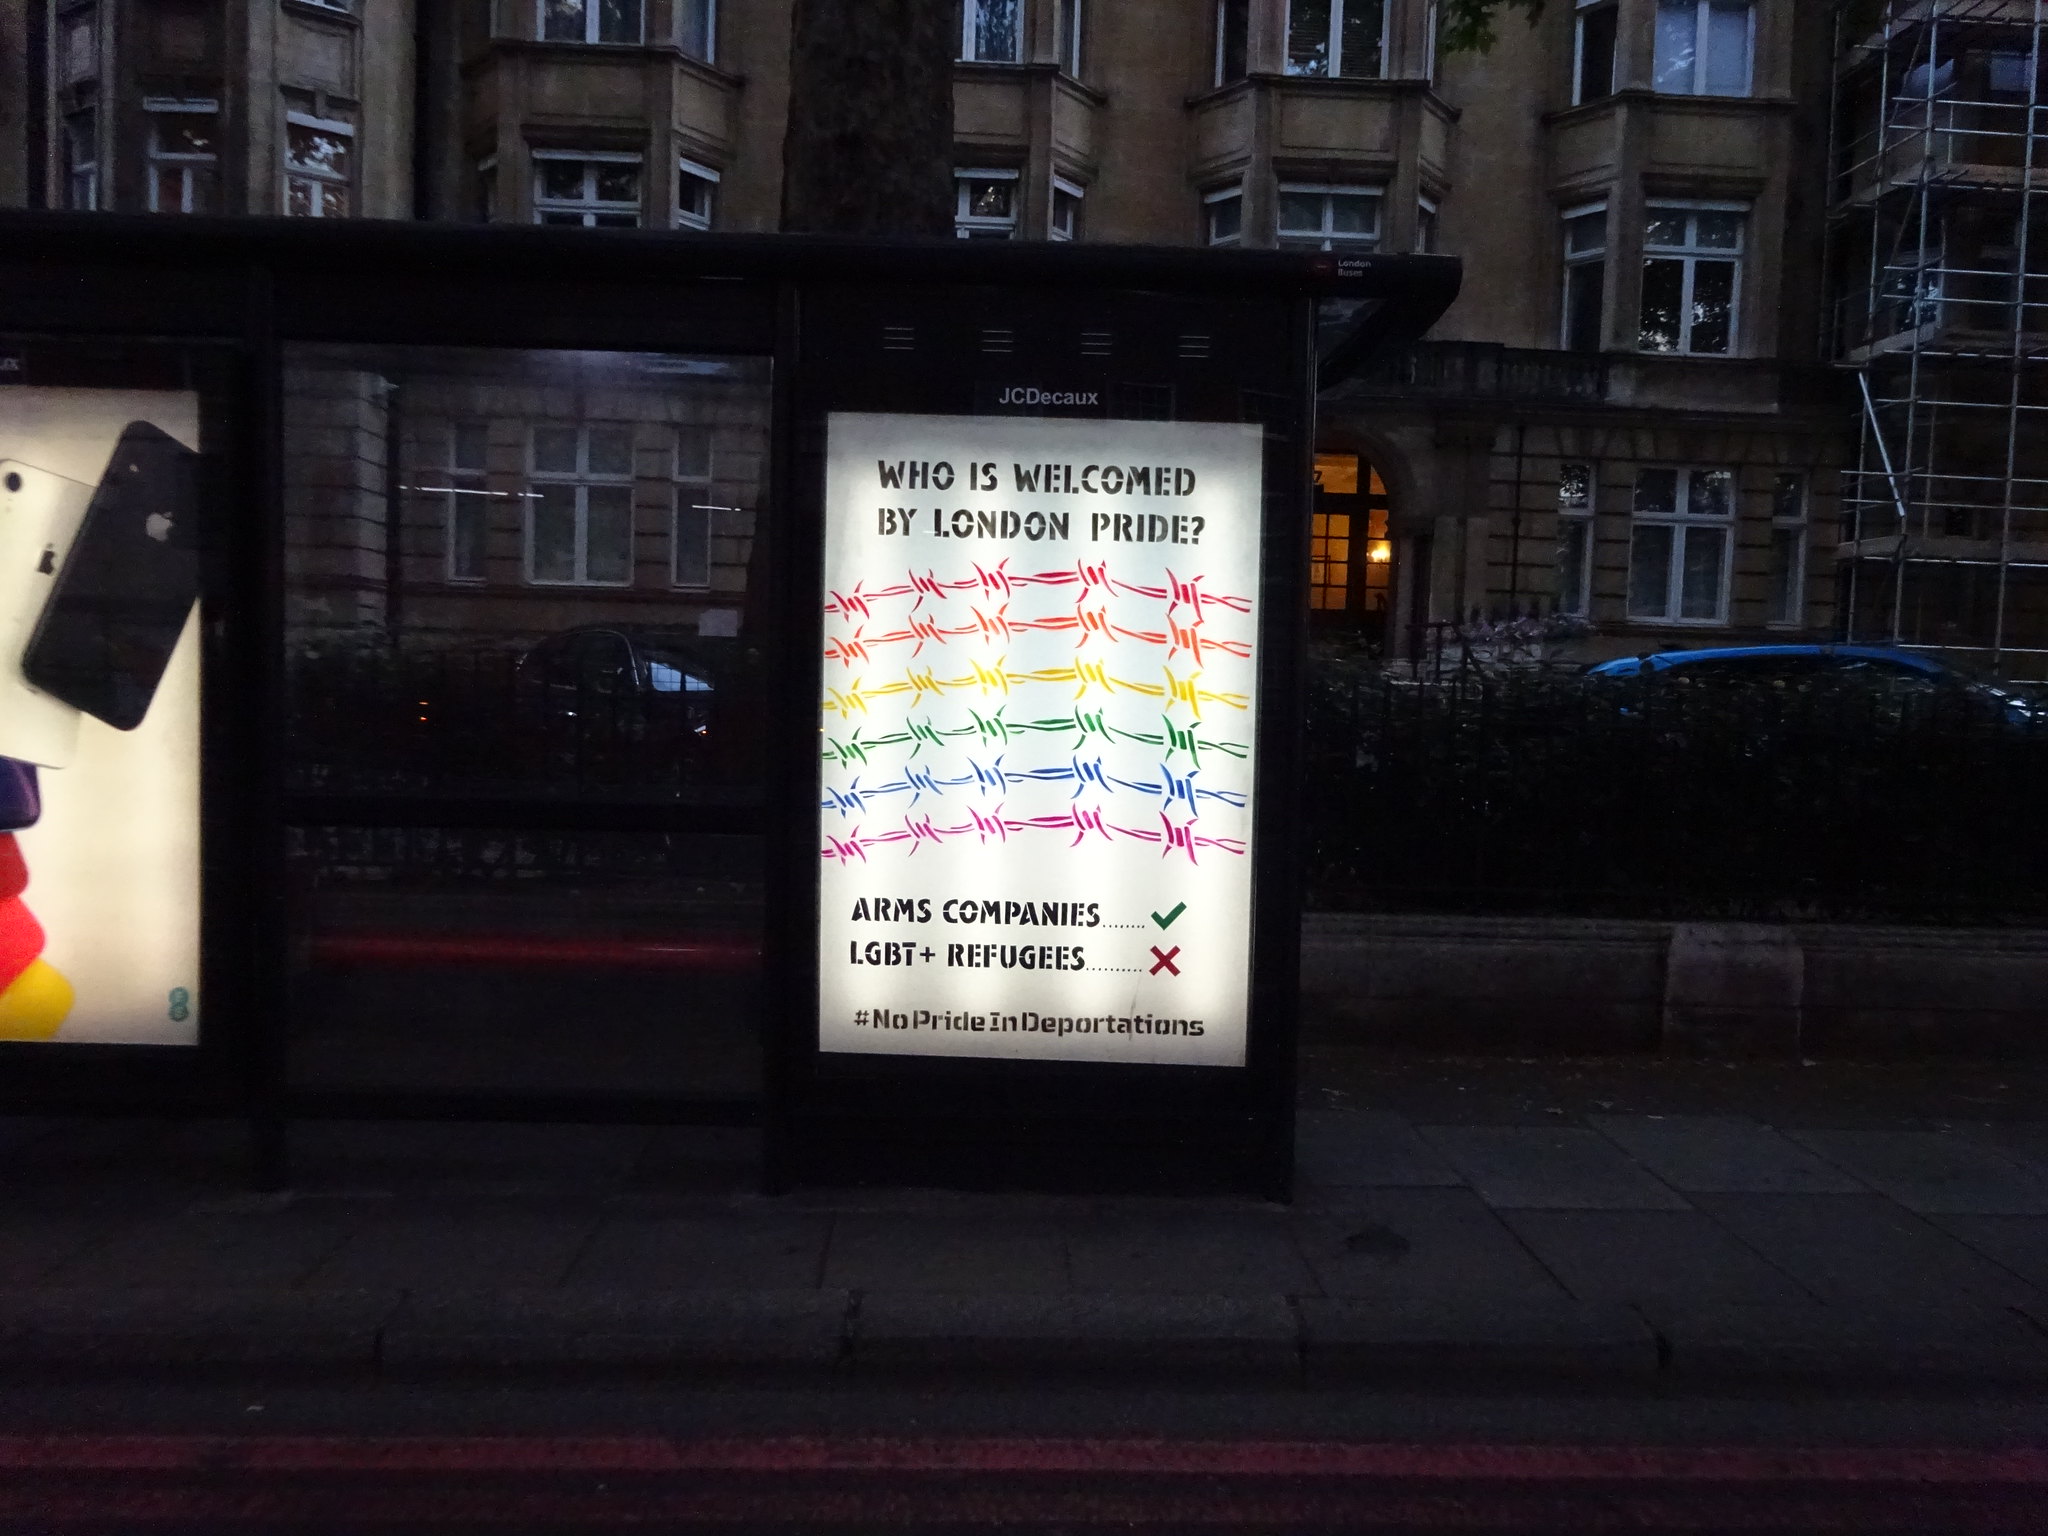 Bus stop adhack by Lesbians and Gays Support the Migrants and Protest Stencil protesting the exclusion of LGBT+ asylum seekers, homeless people and community groups from Pride in London5